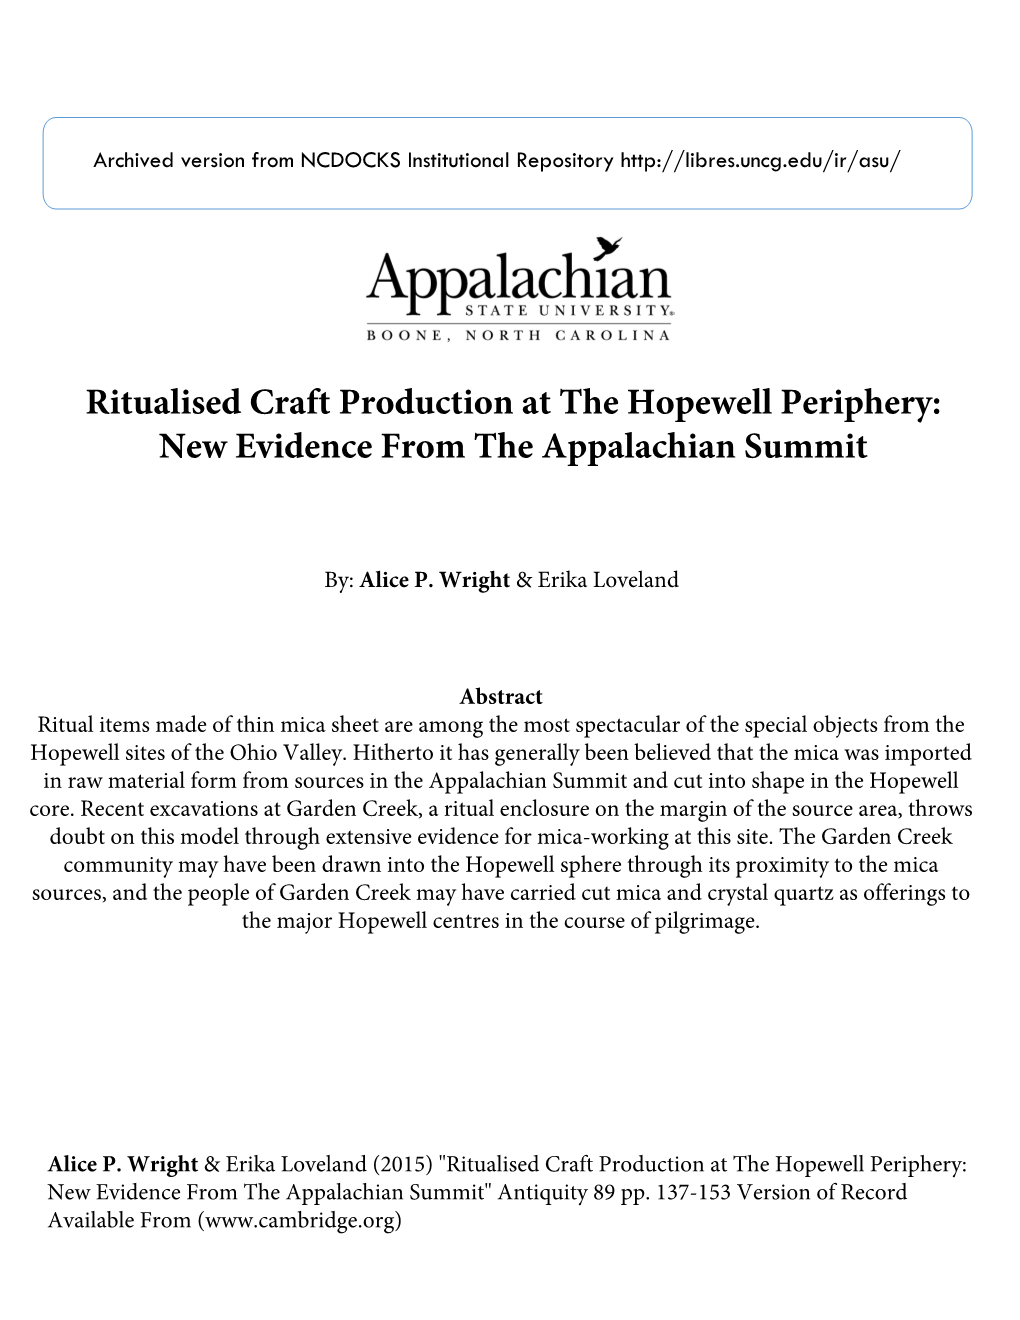 Ritualised Craft Production at the Hopewell Periphery: New Evidence from the Appalachian Summit